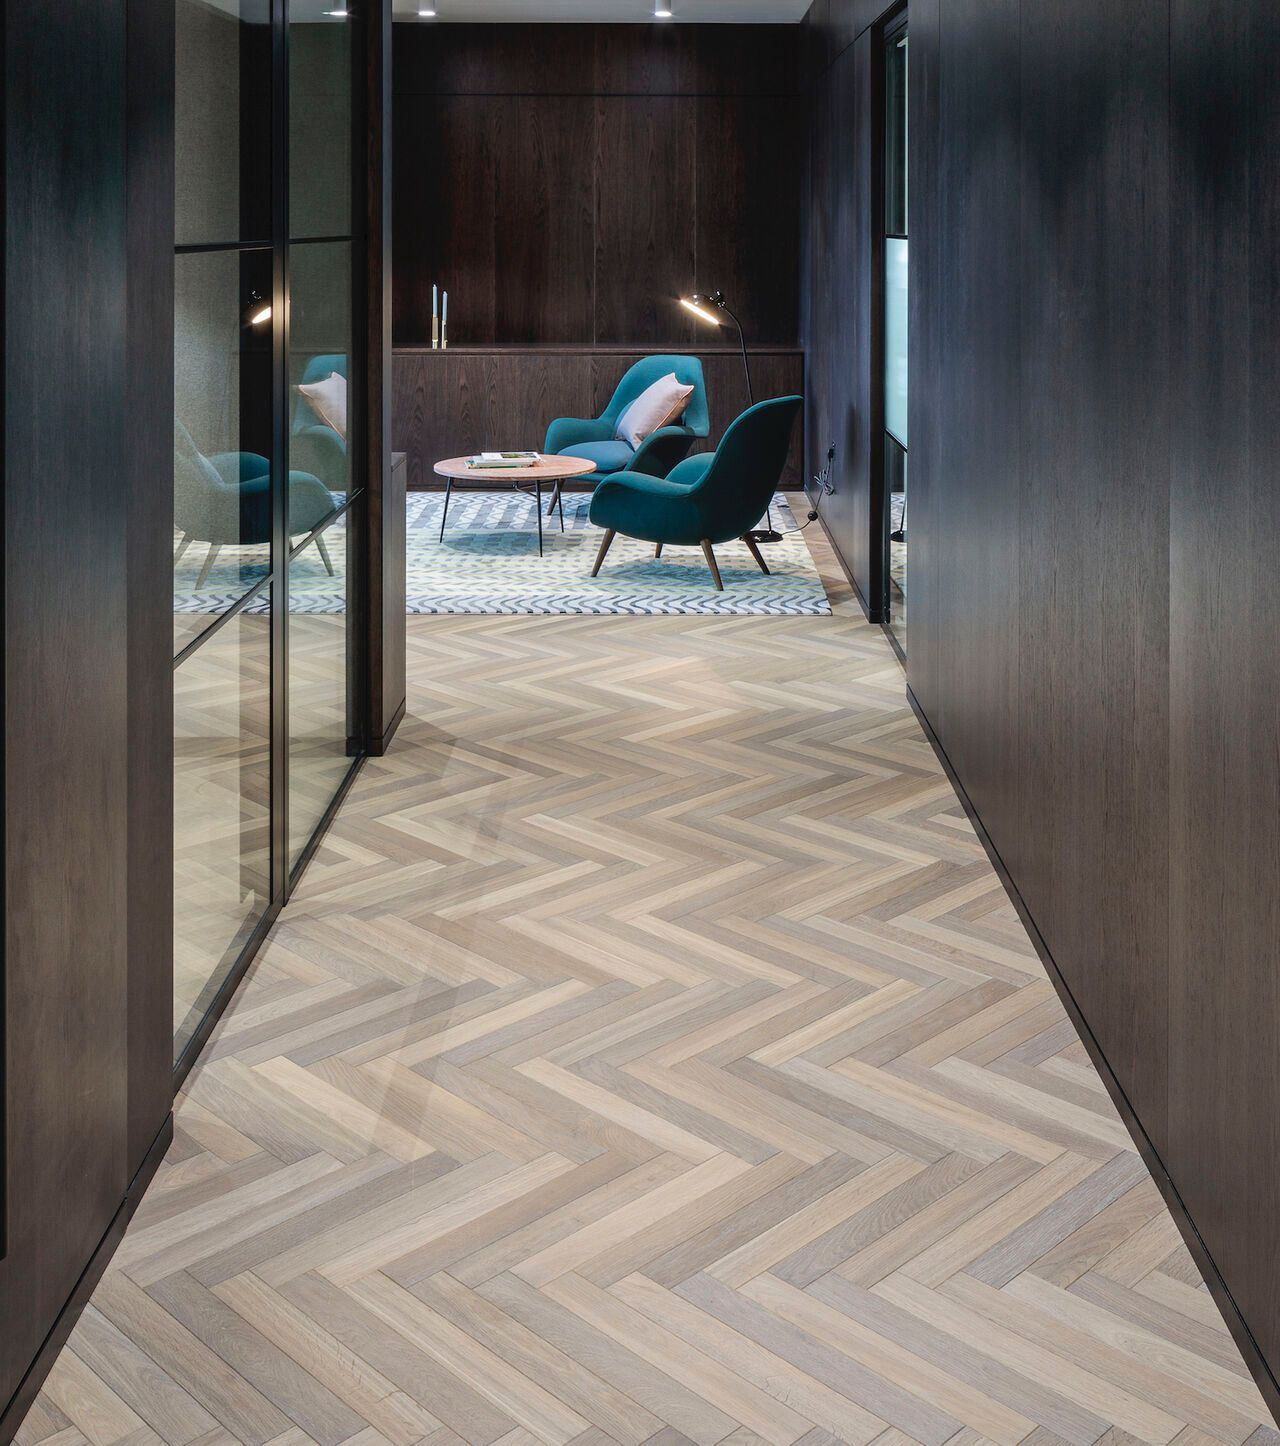 Herringbone wooden flooring, pattern or texture | Gf Parquet more then 30 year experience